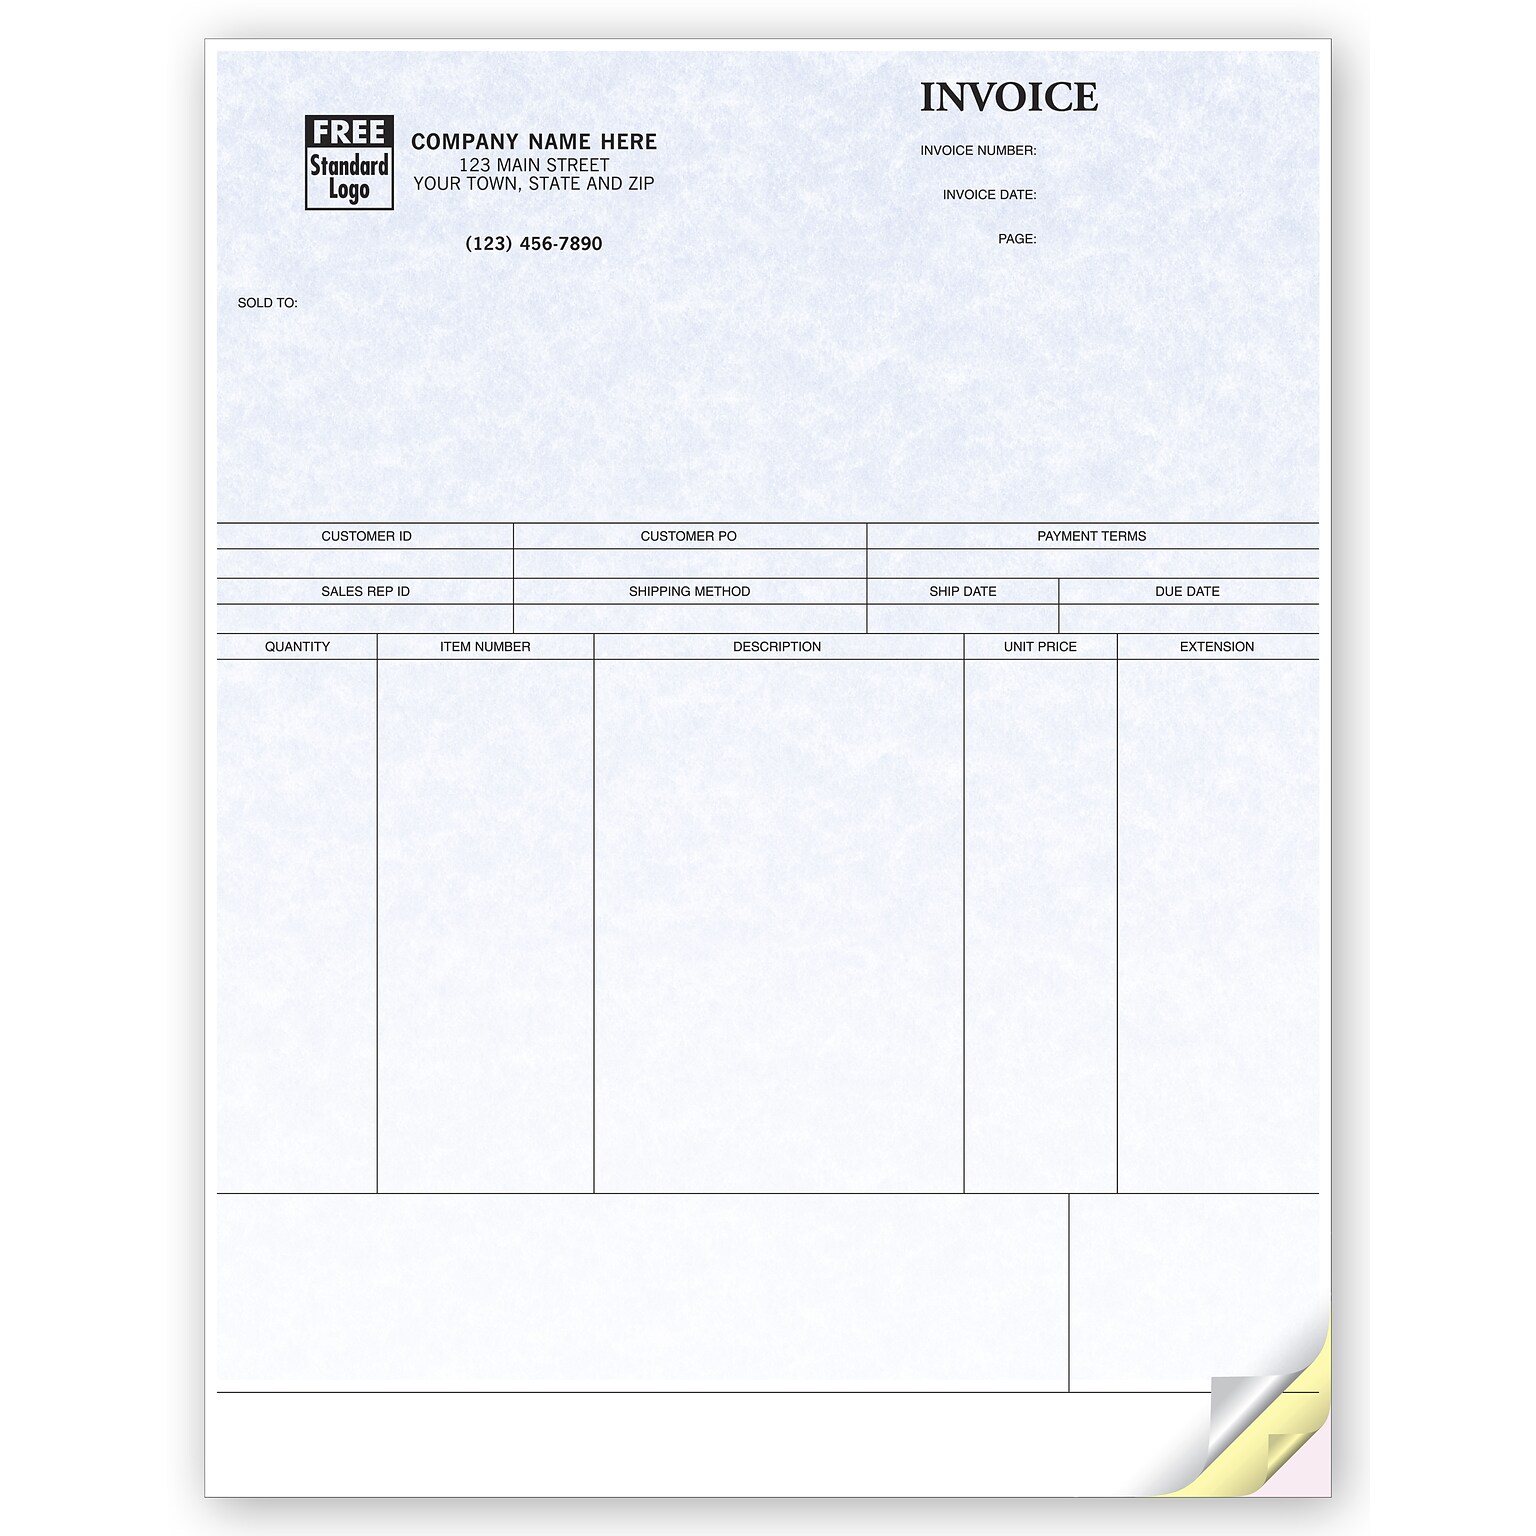 Custom Product Invoices, Laser, 3 Parts, 1 Color Printing, 8 1/2 x 11, 500/Pack